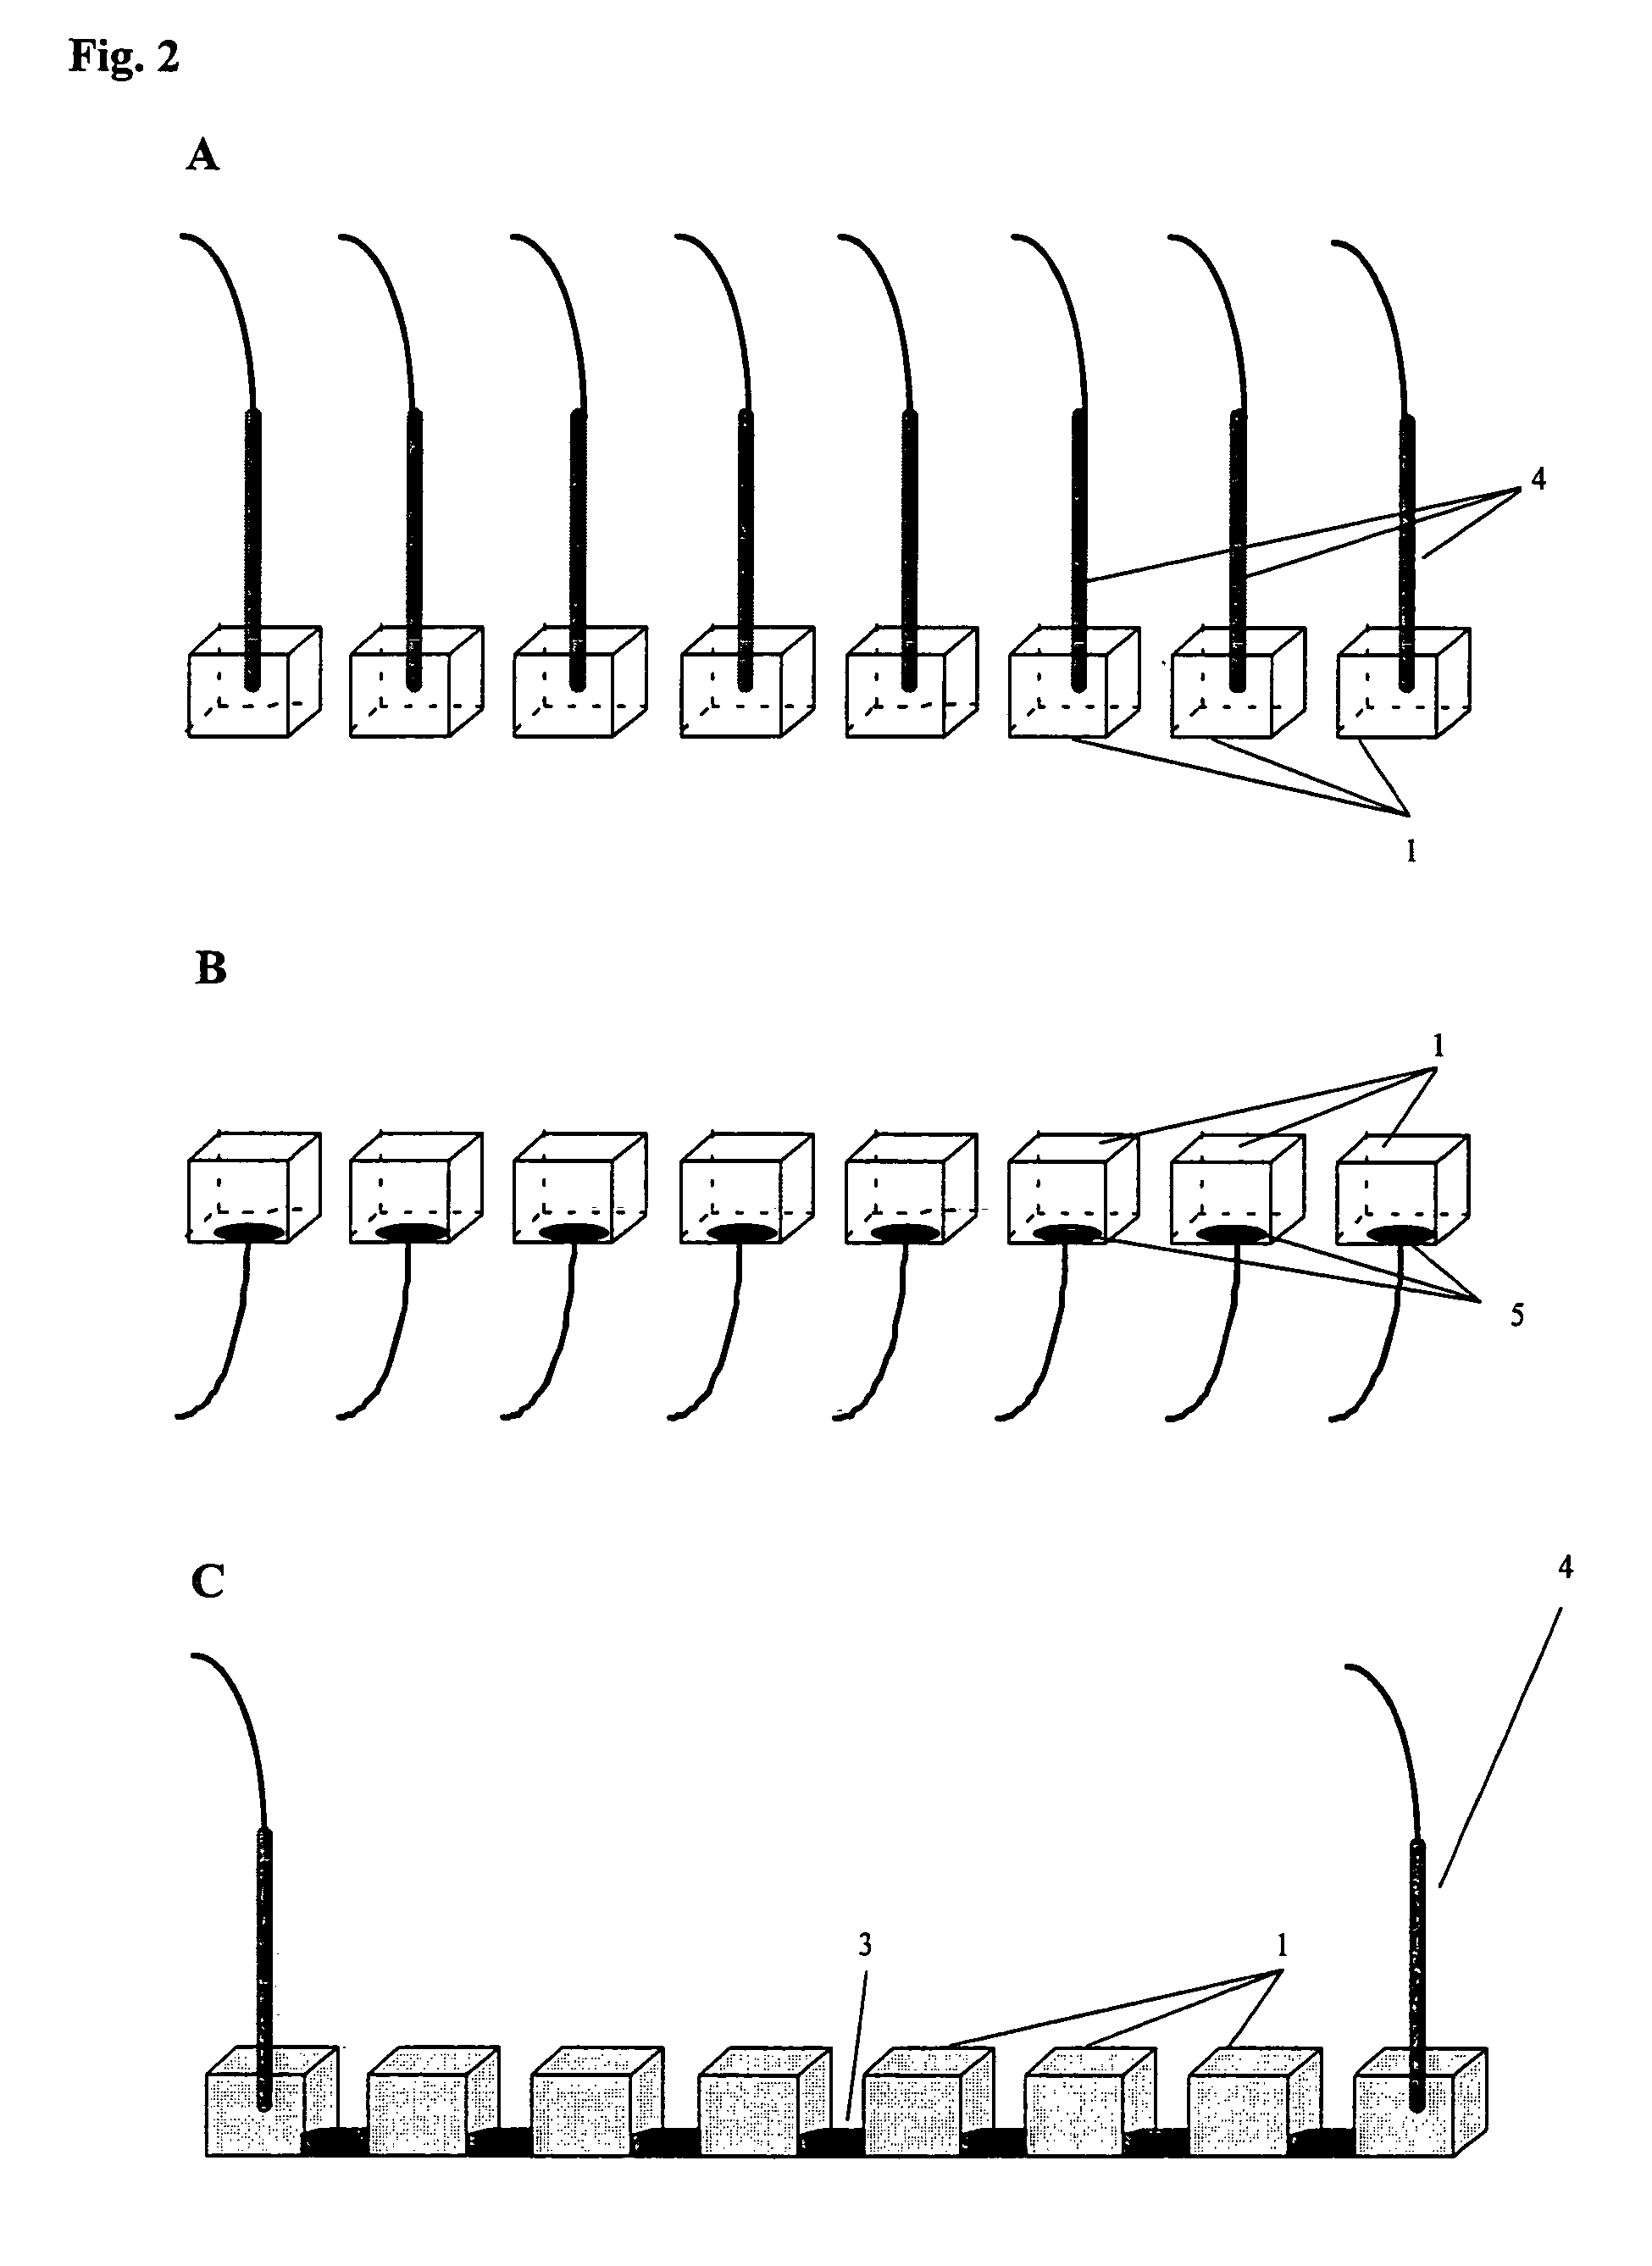 Apparatus and method for separating an analyte